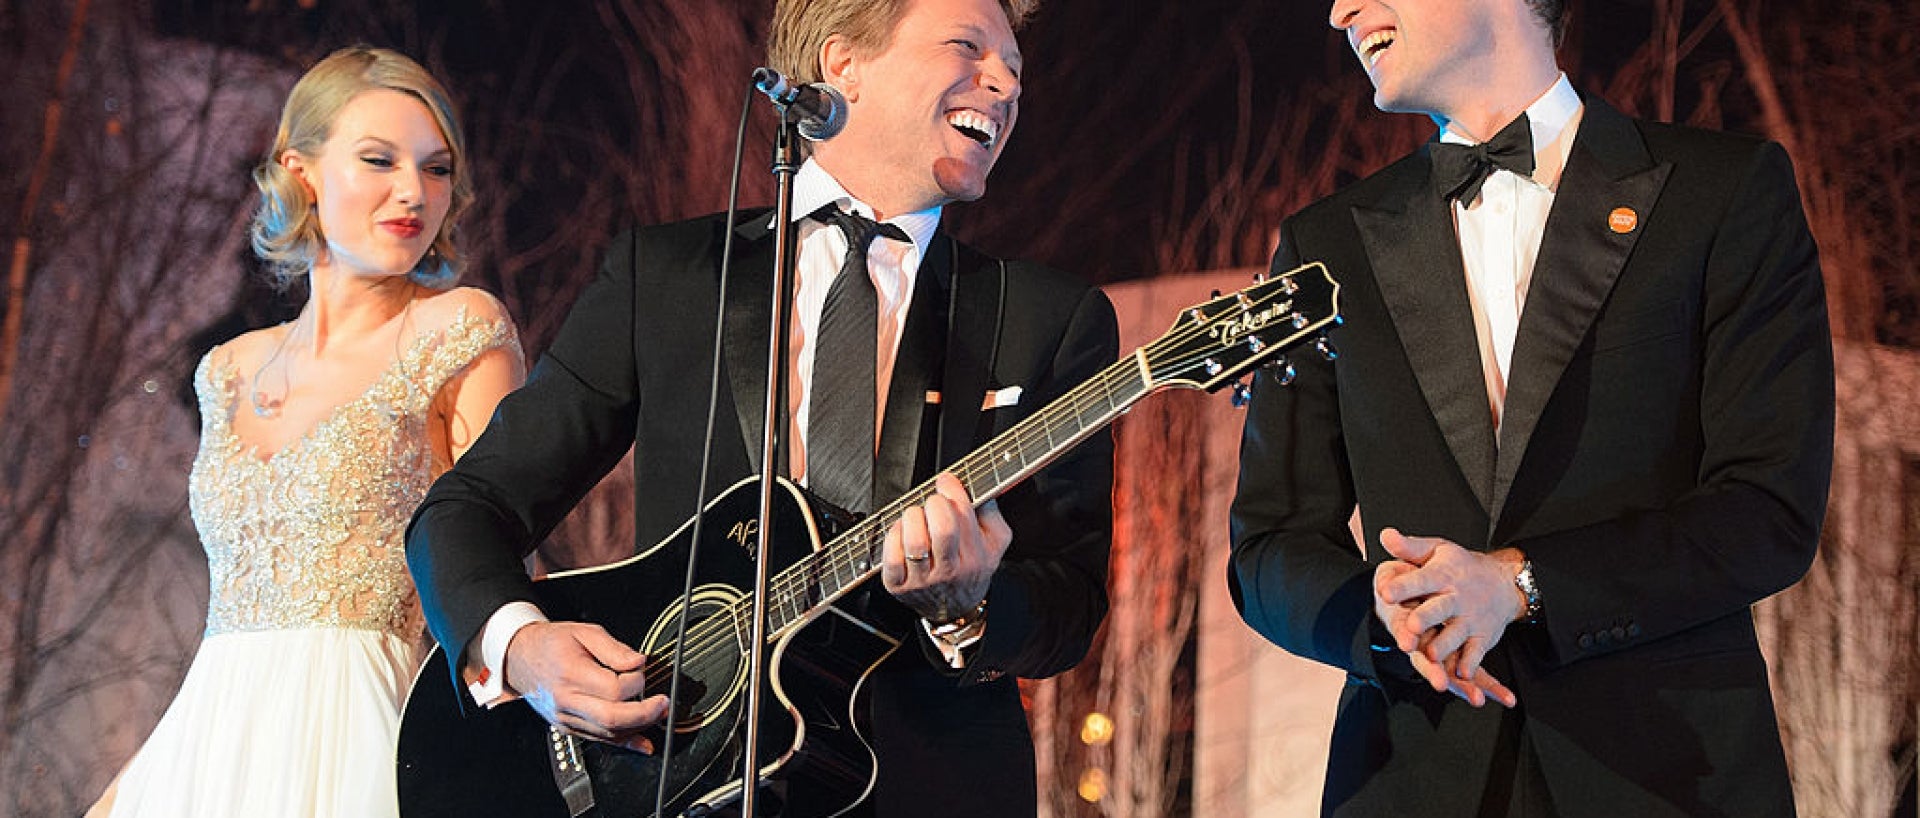 Taylor Swift, Bon Jovi holding a guitar, and Prince William - all on stage smiling